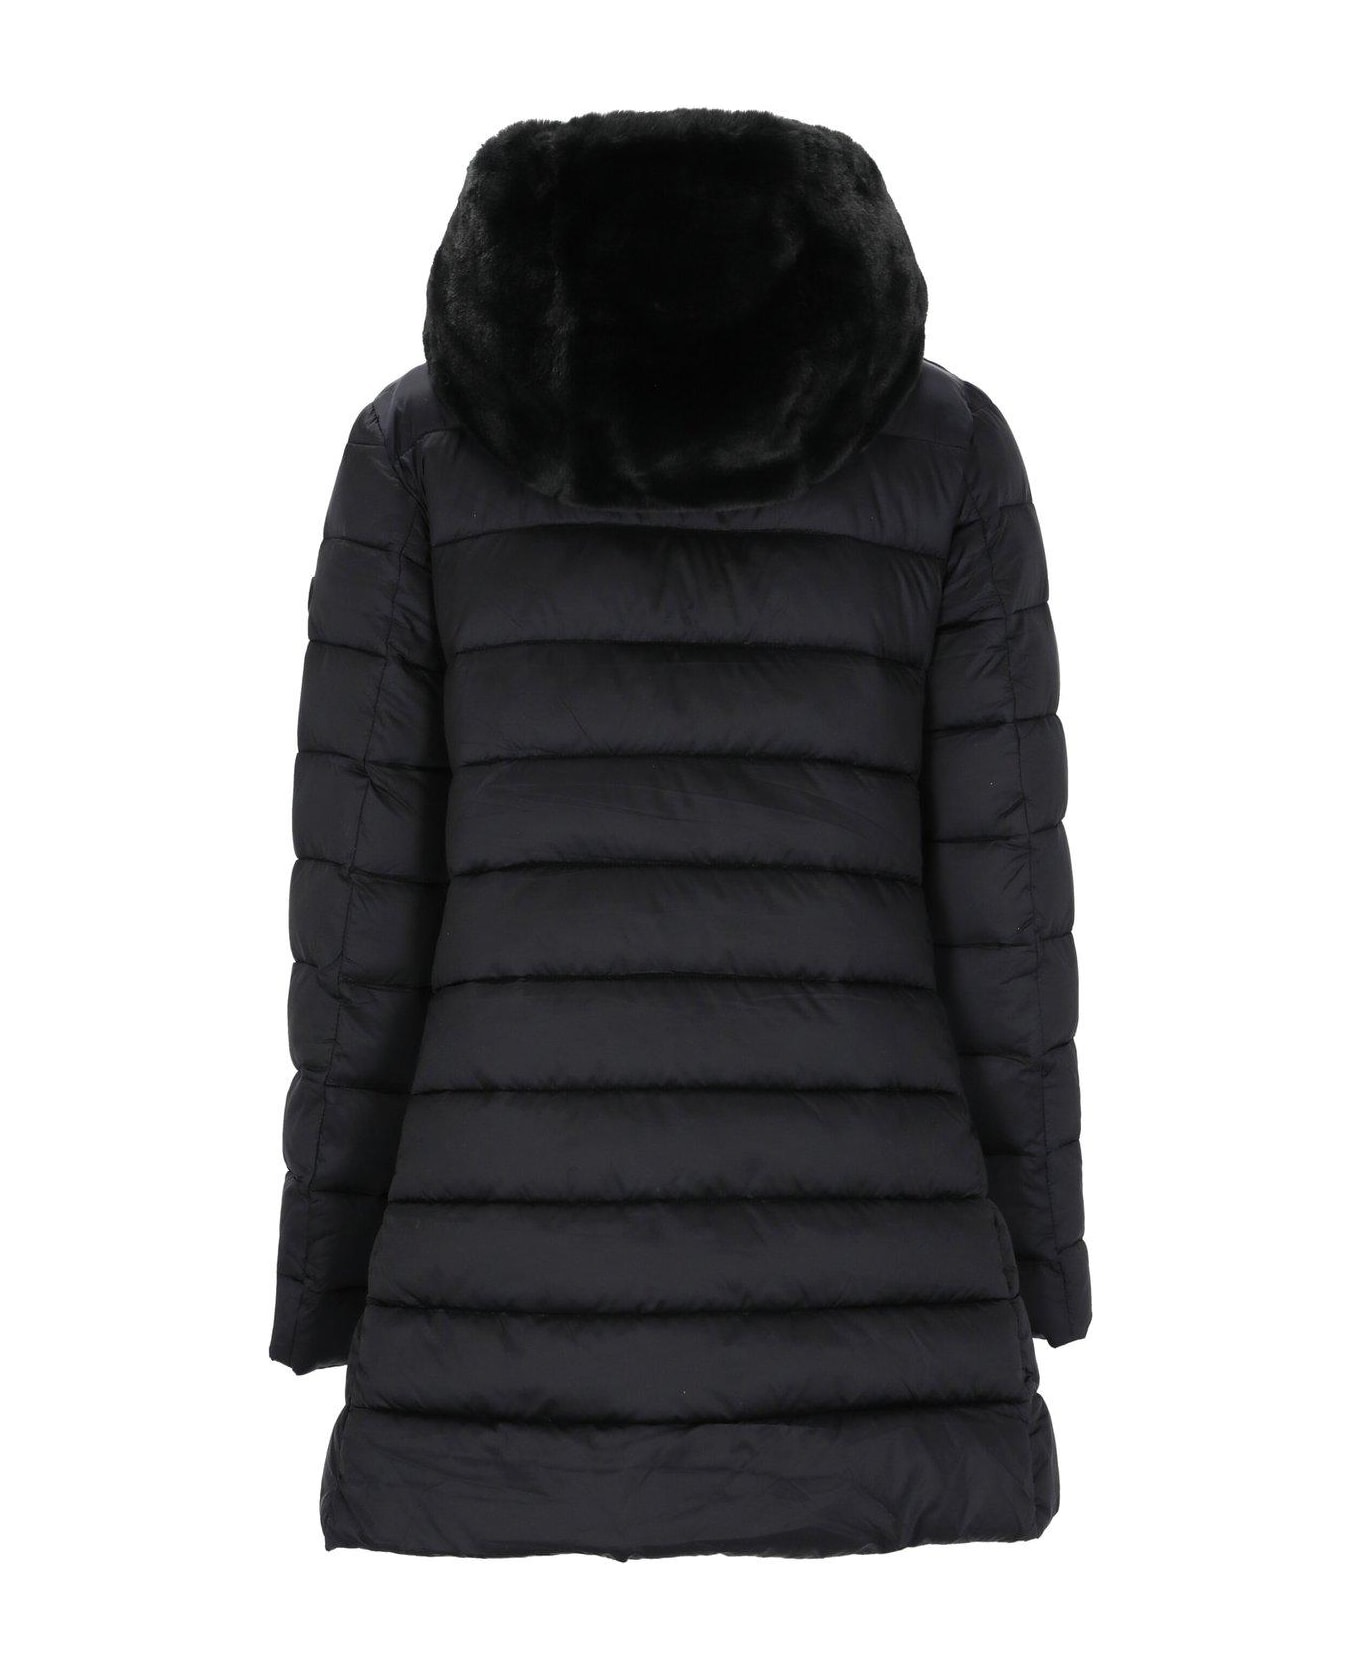 Save the Duck High Neck Hooded Coat - Black コート